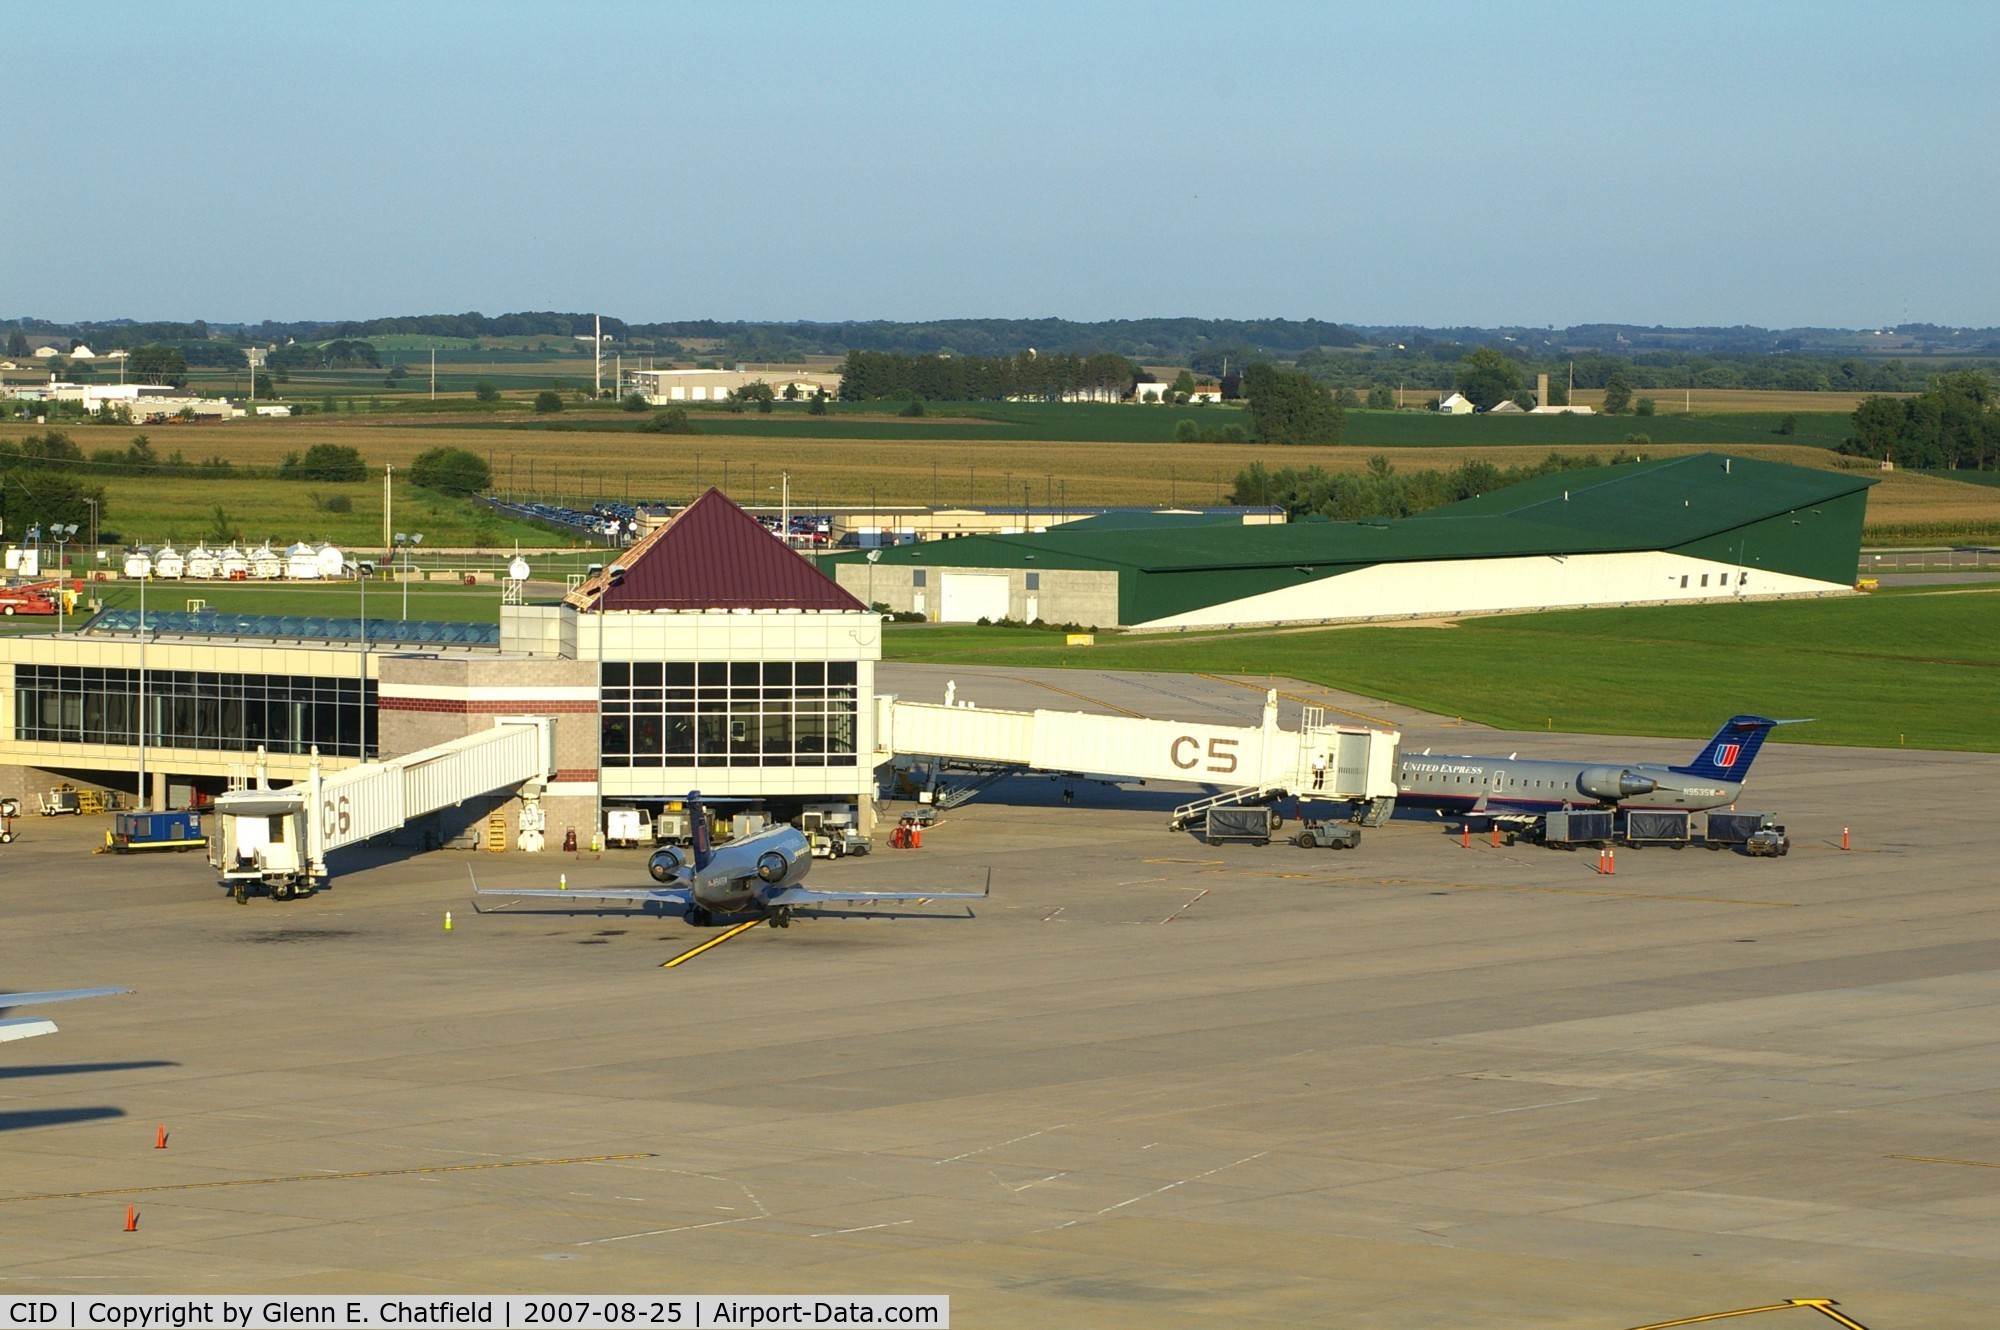 The Eastern Iowa Airport (CID) - Terminal as seen from the control tower